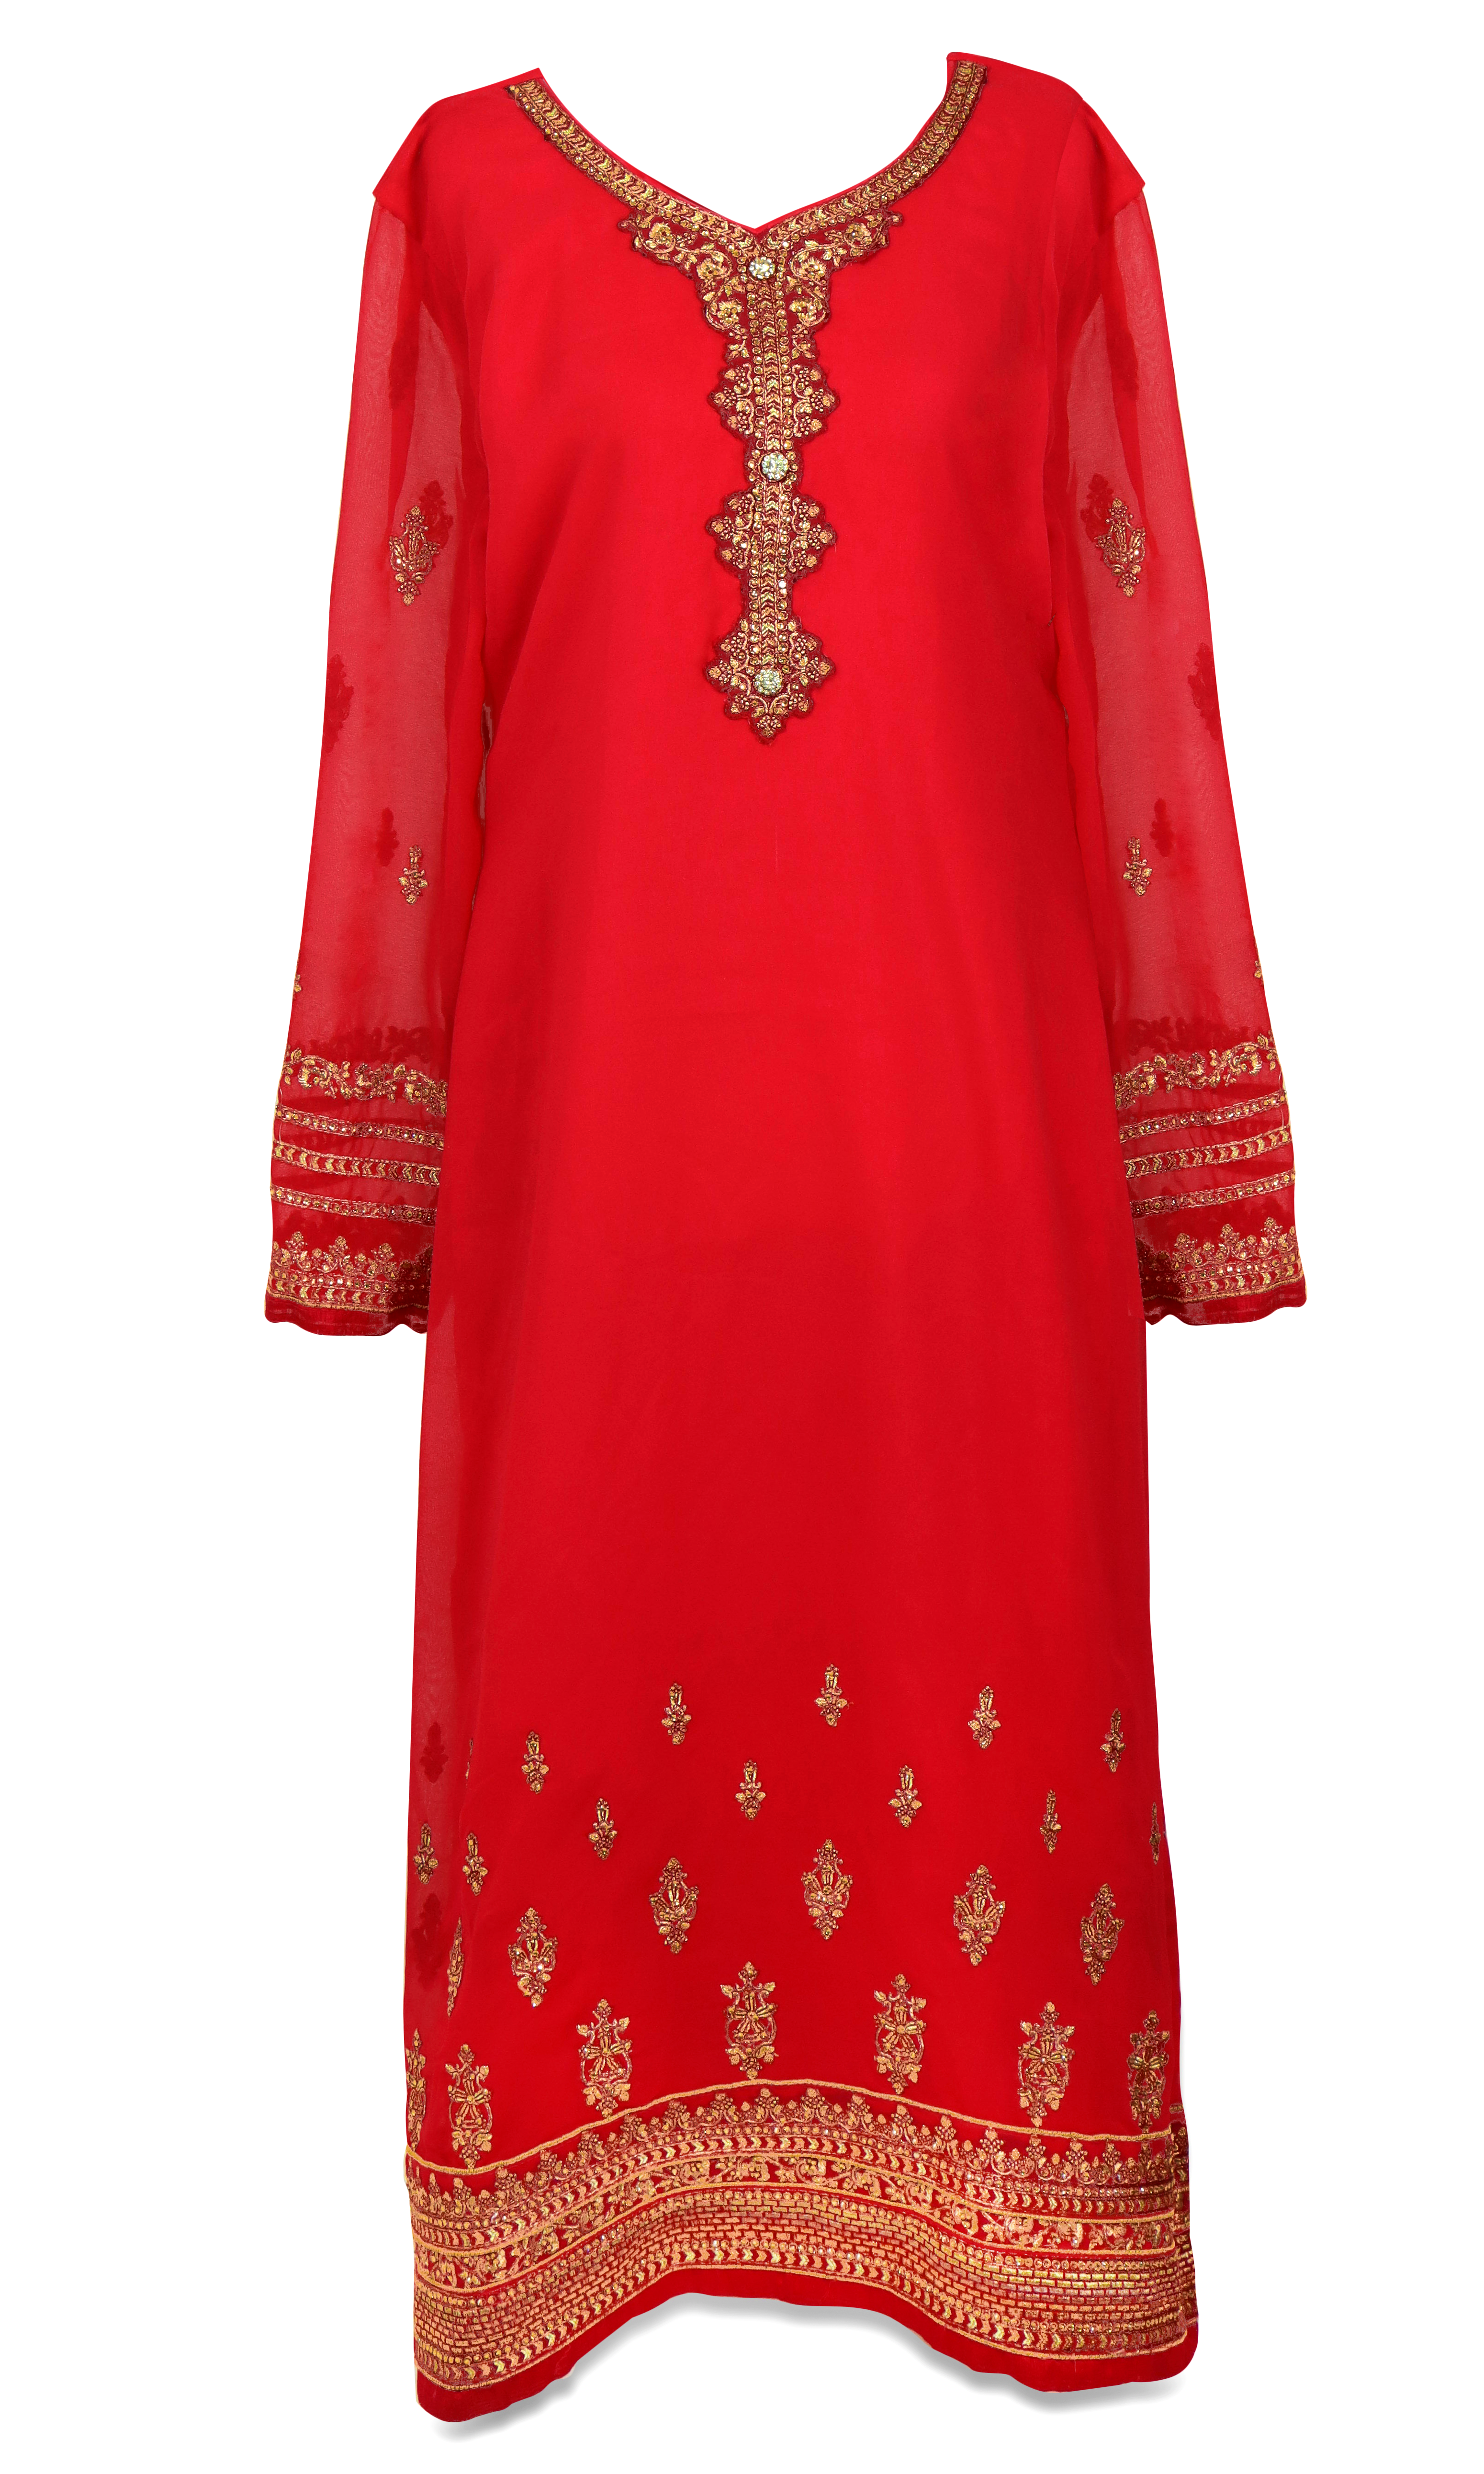  Stunning 3 piece coral red suit matching pants and a dupatta (shawl).